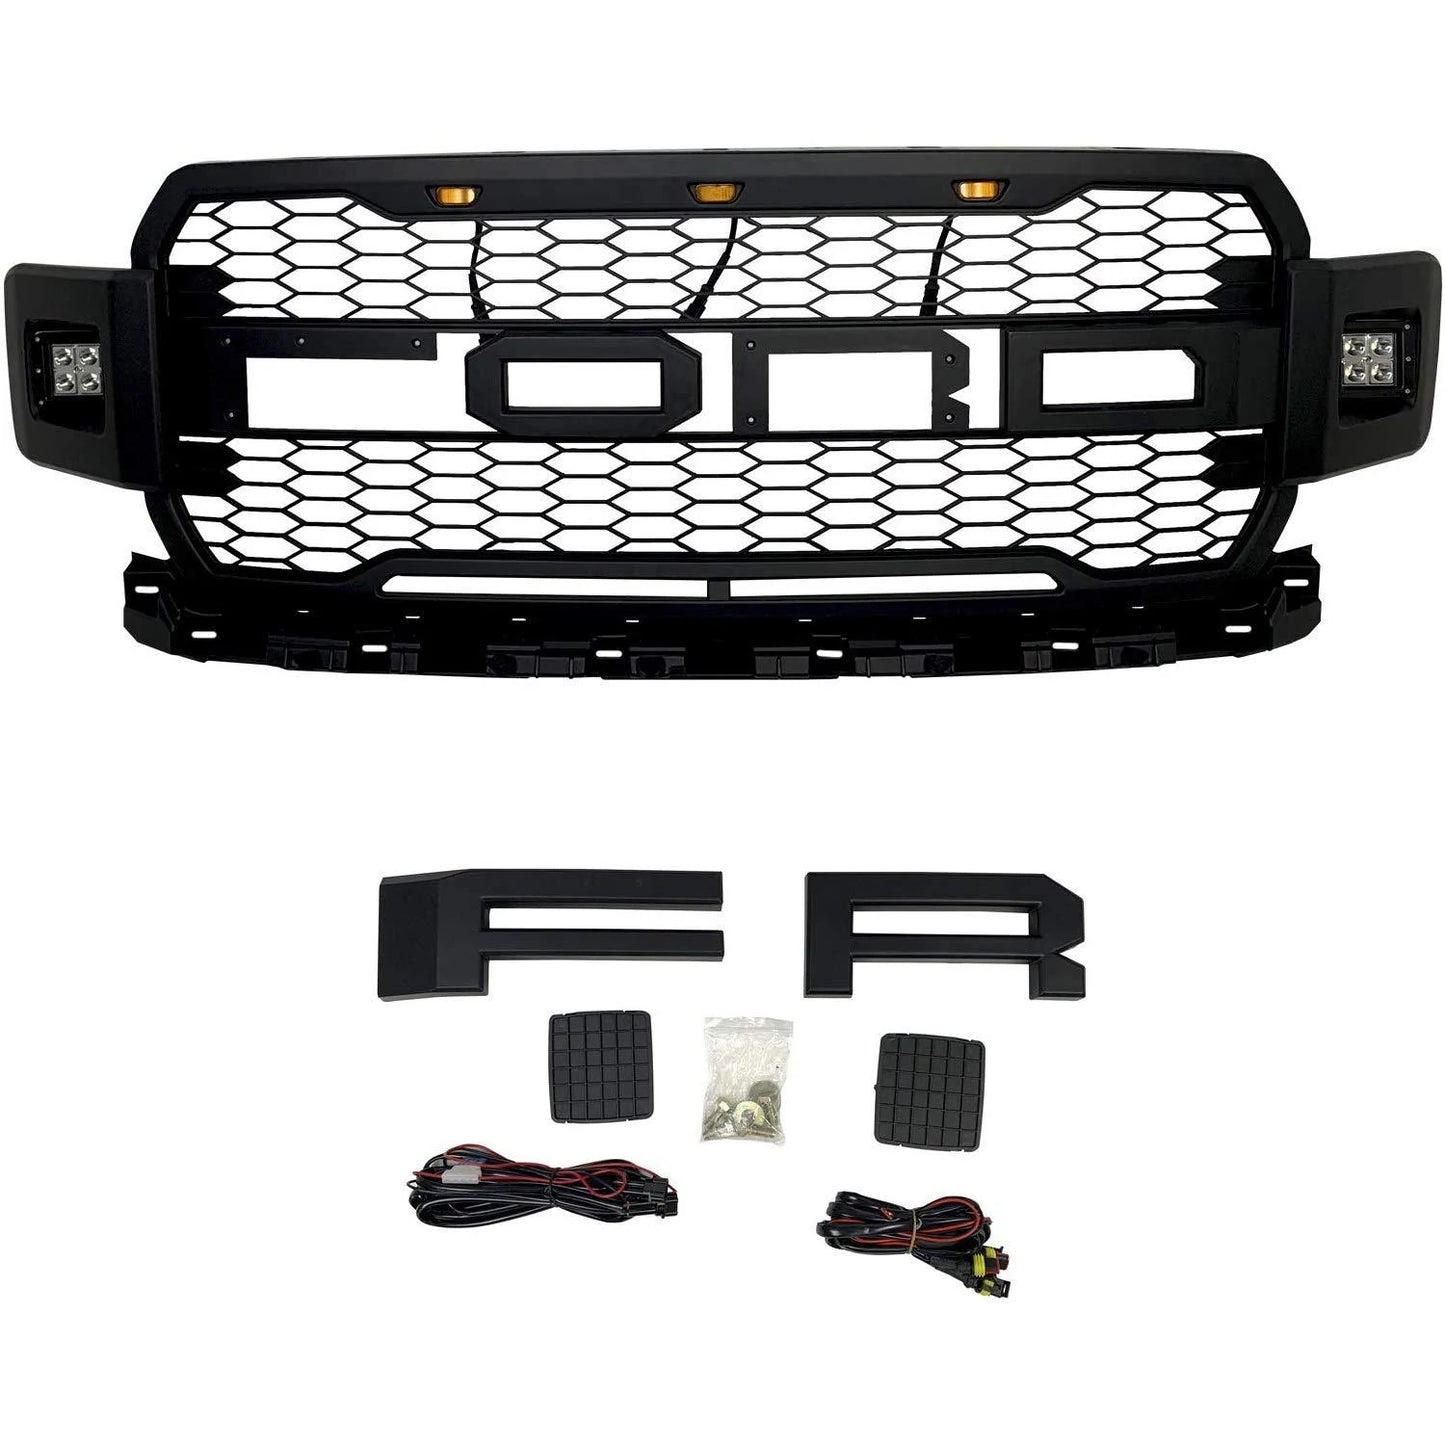 Goodmatchup Front Grill For 2018 2019 2020 f150 Raptor Grill  W/ LED W/Letters Matte Black